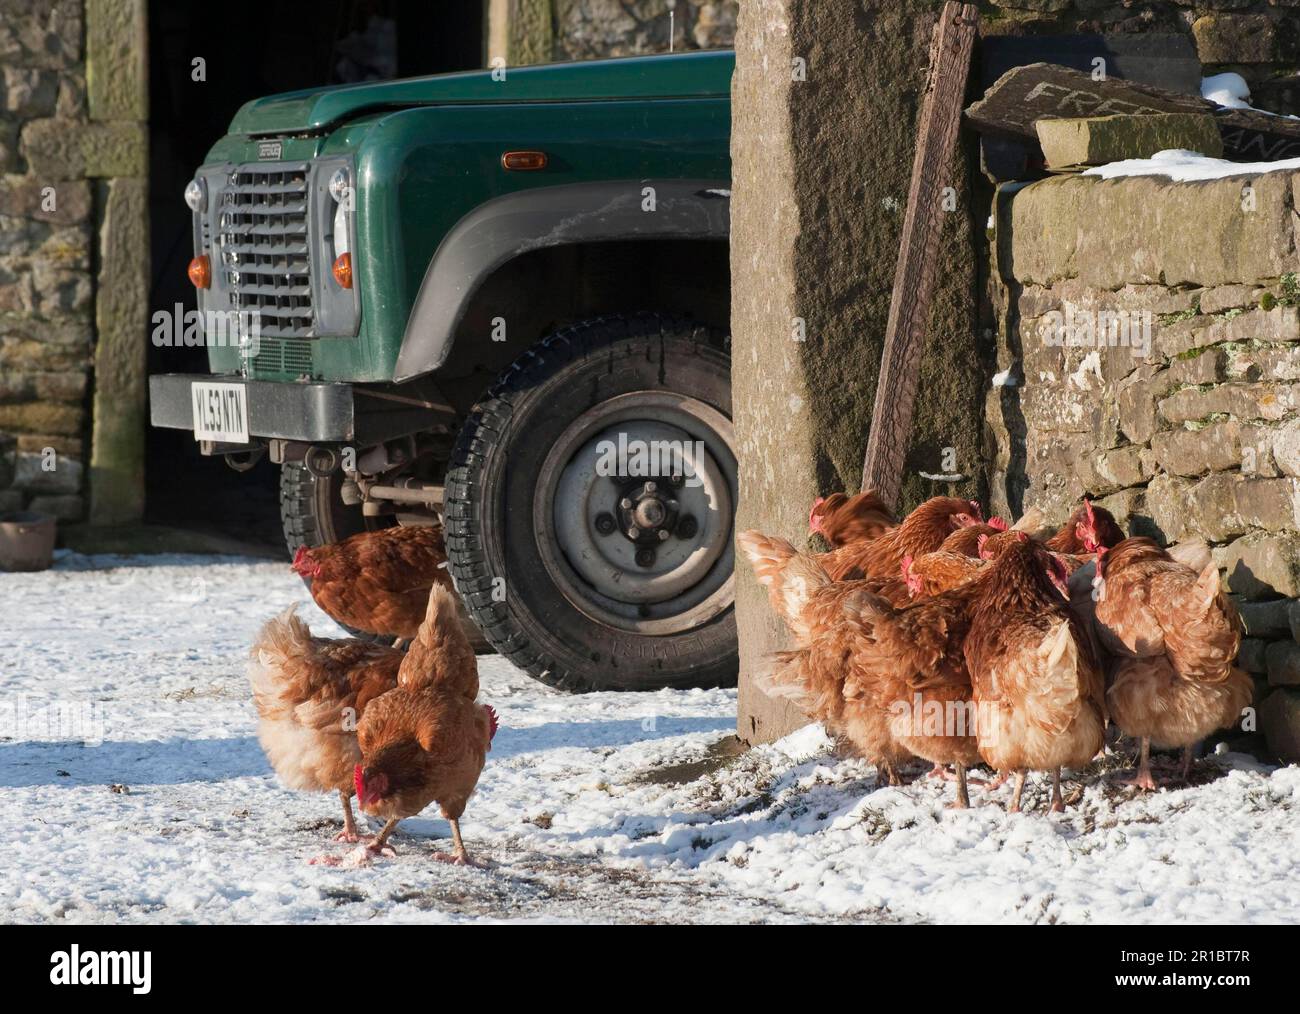 Domestic hens, free-range hens, flock standing on snow in barn, Whitewell, Clitheroe, Lancashire, England, winter Stock Photo